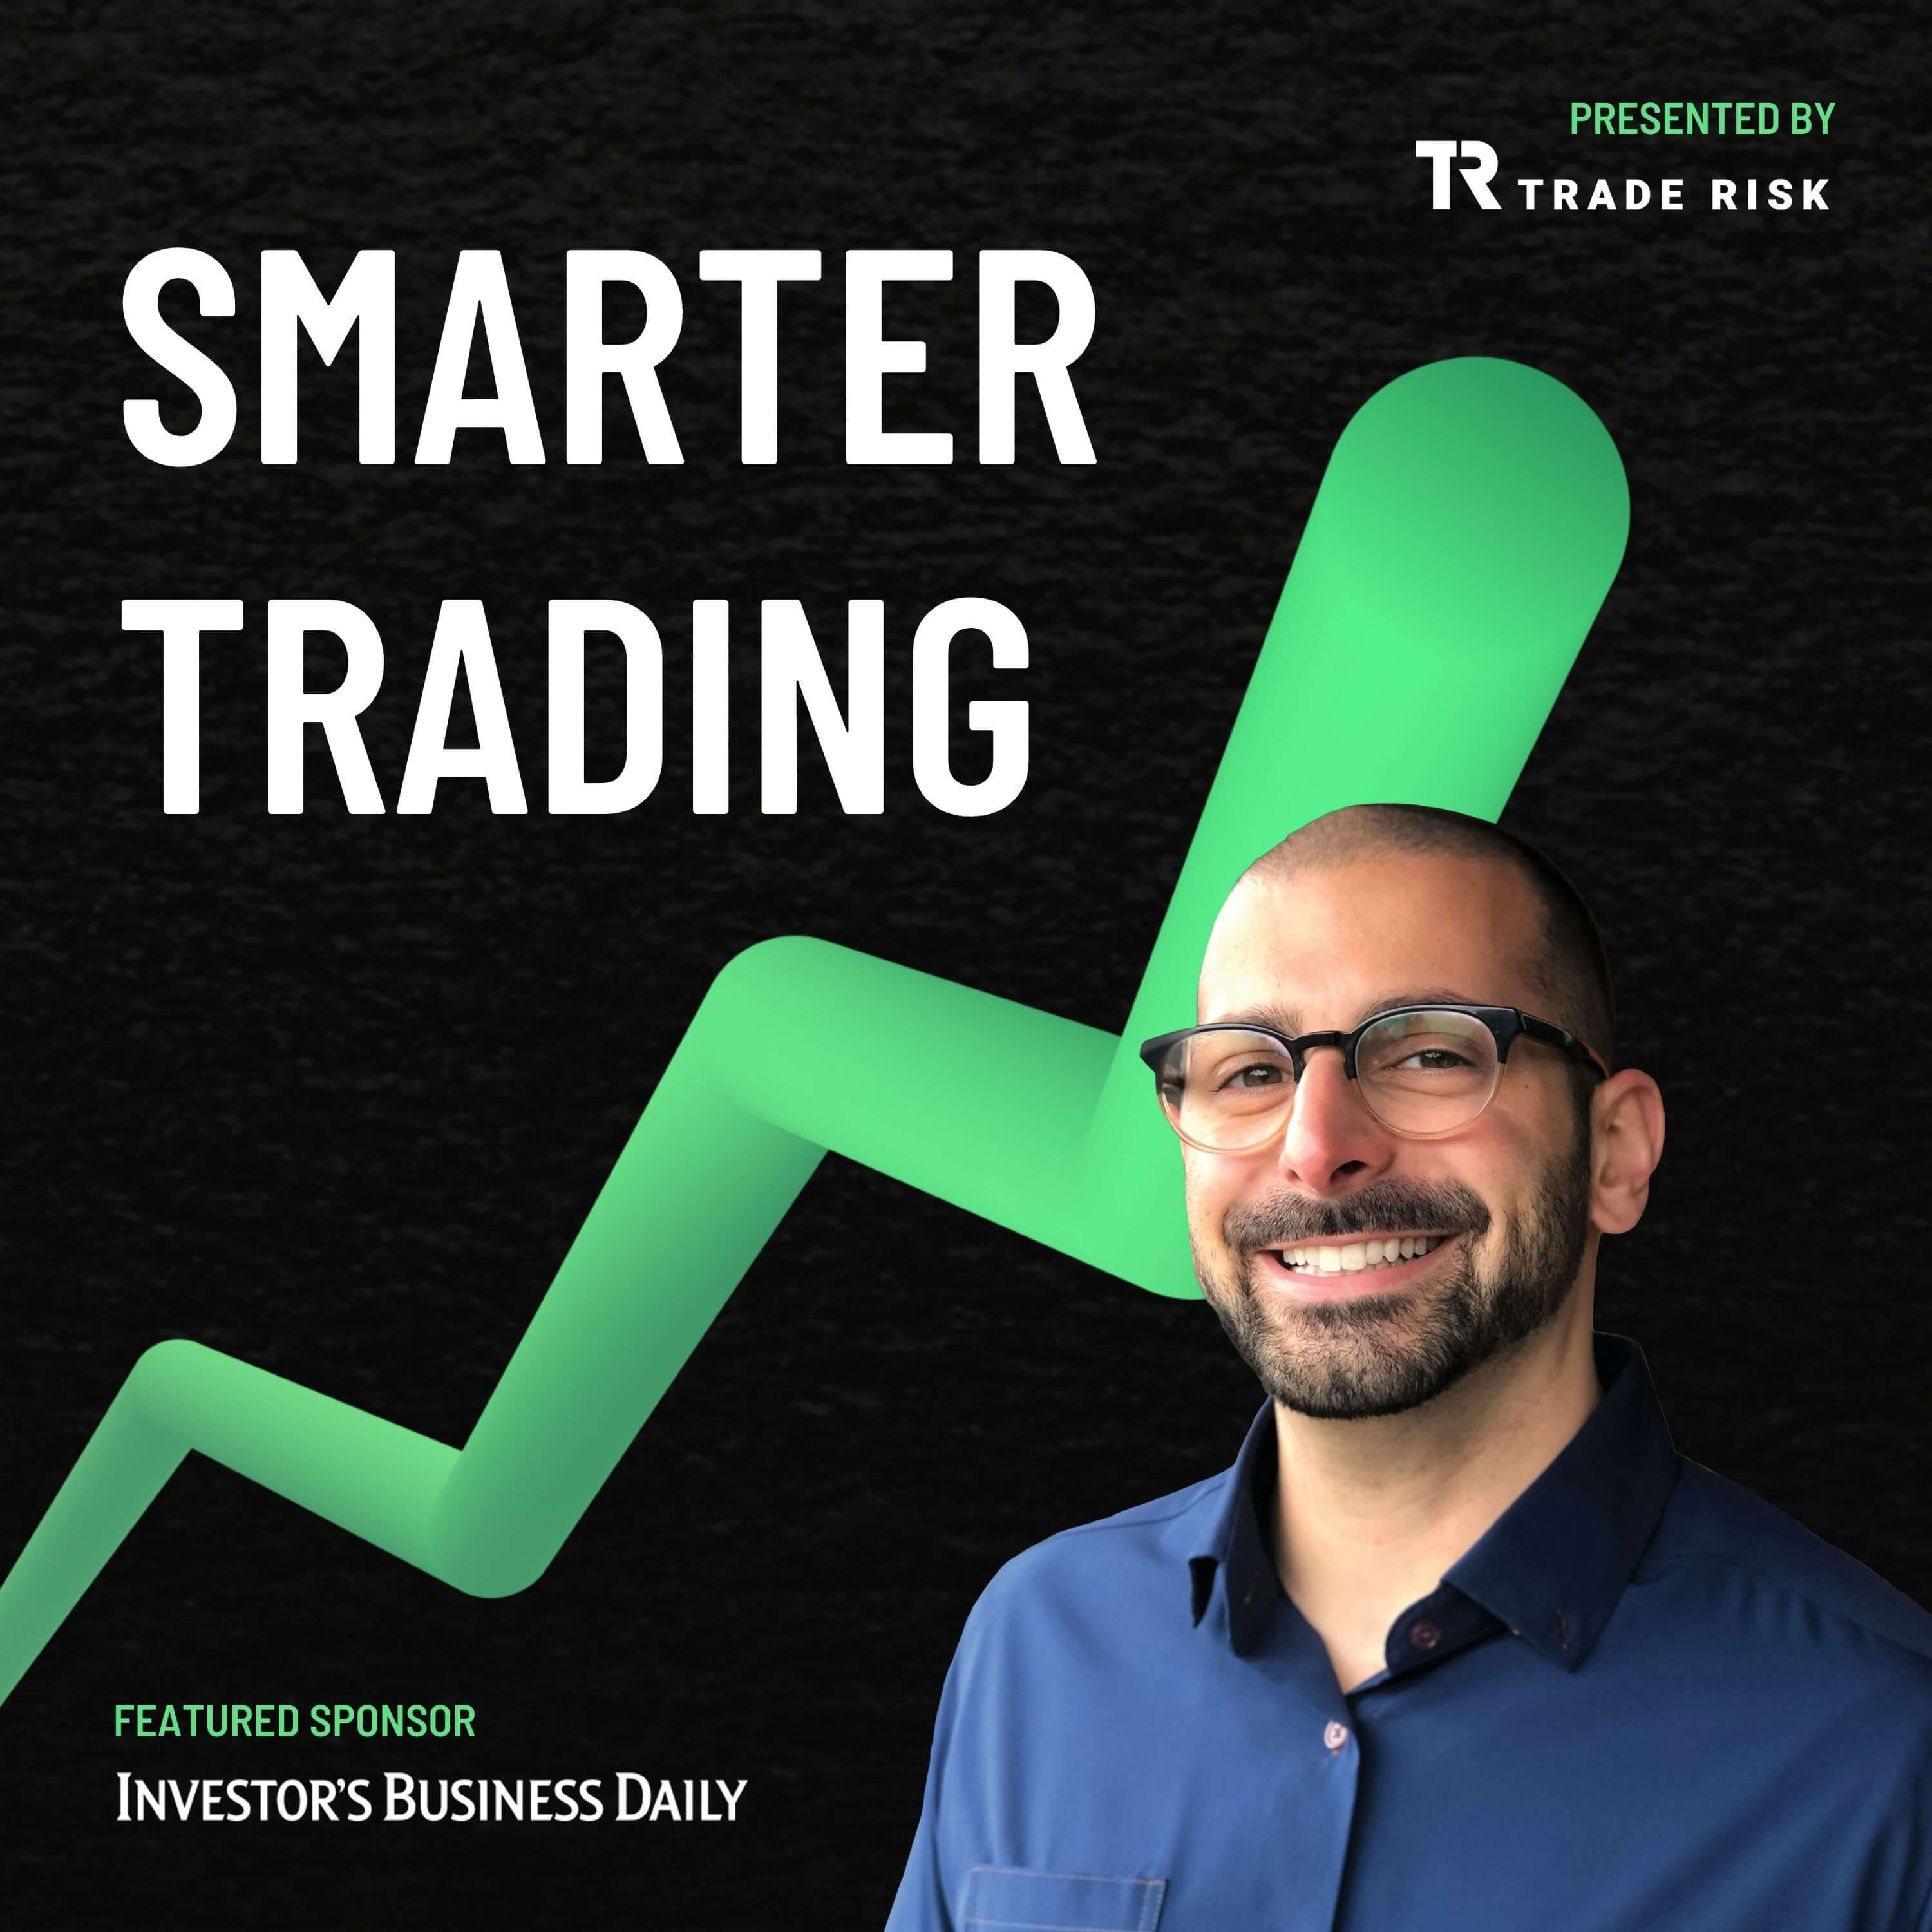 Brian Lund — Live episode sharing market analysis & answering your questions